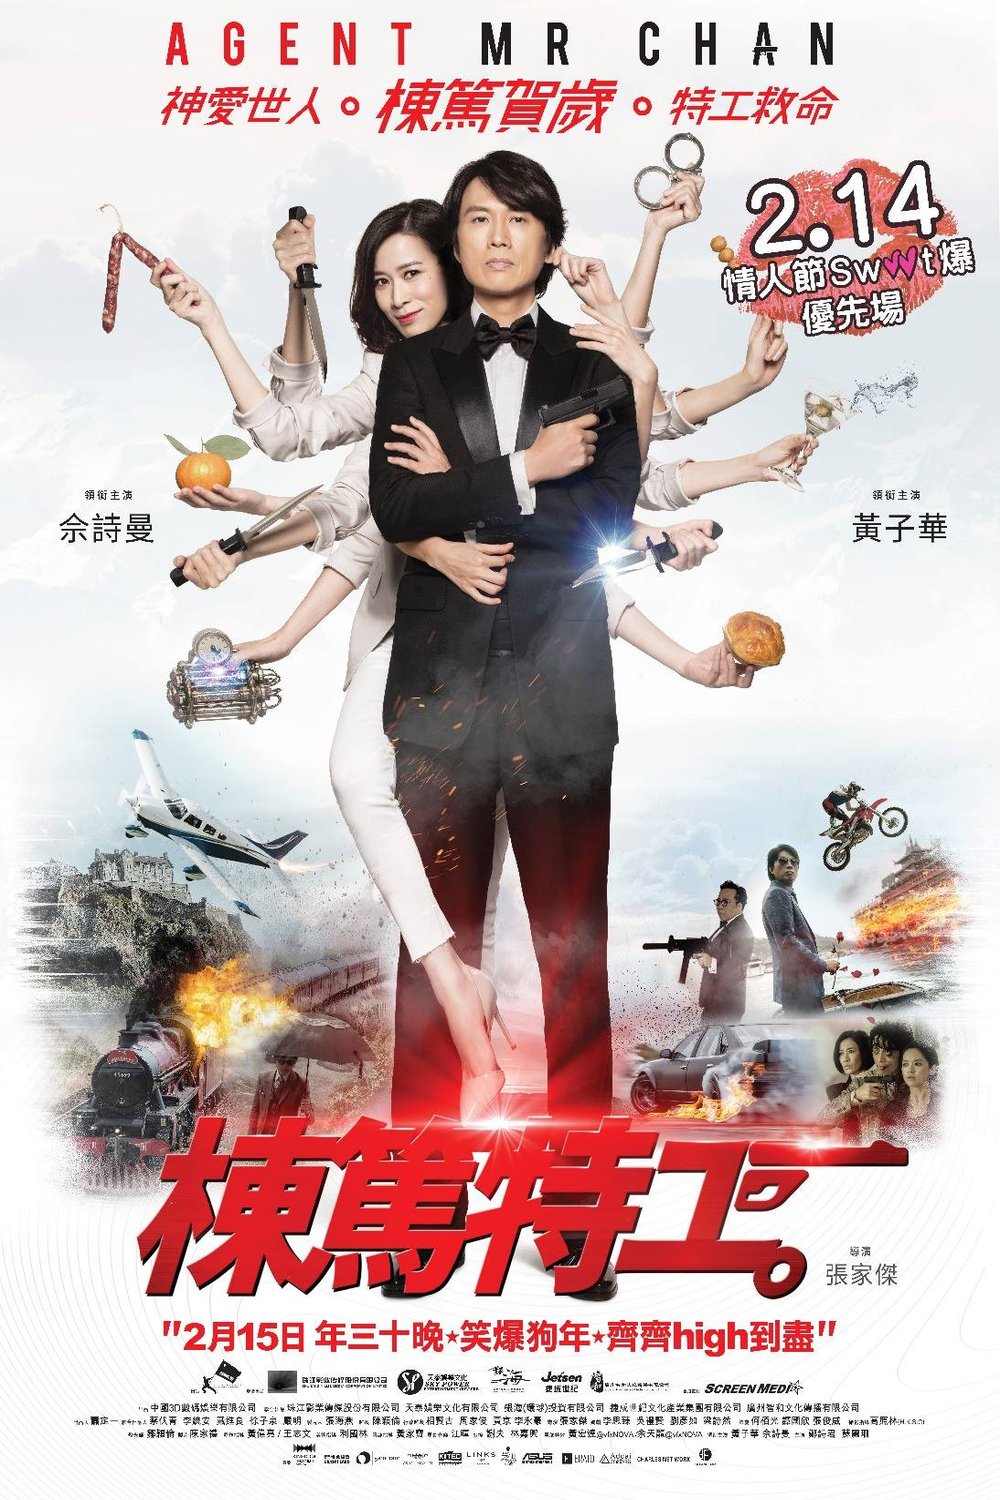 Cantonese poster of the movie Dung duk dut gung